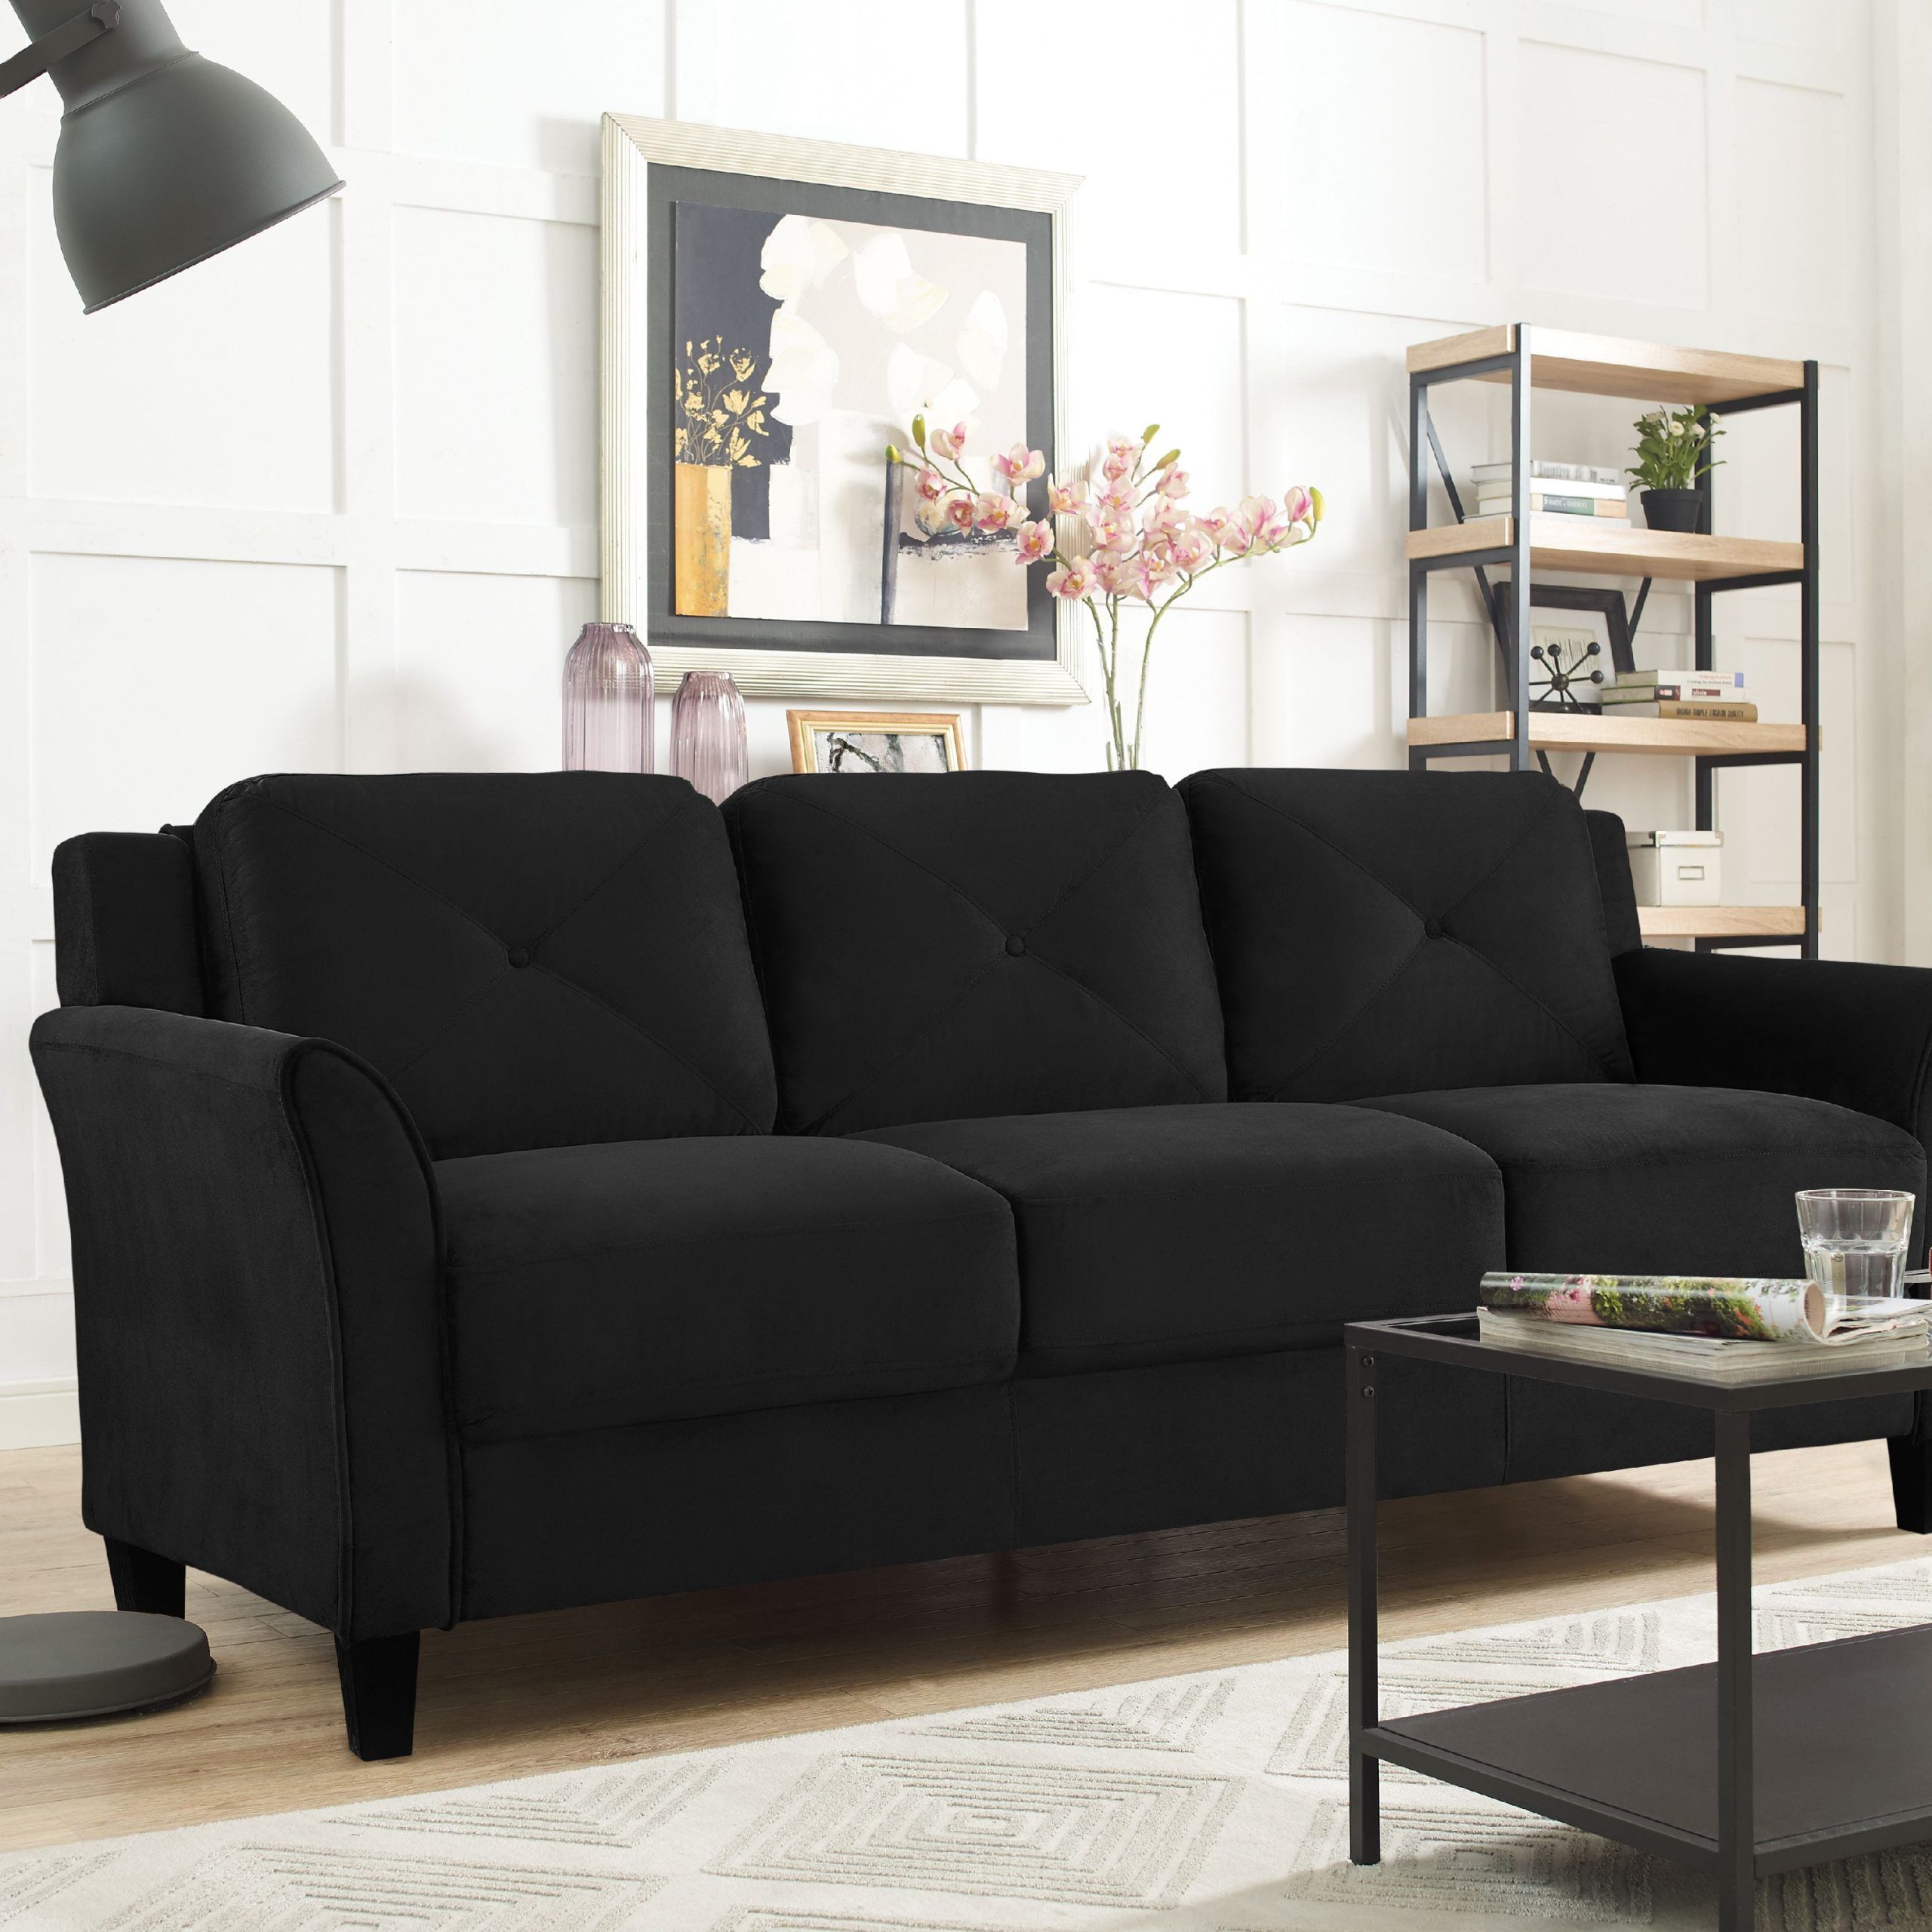 Lifestyle Solutions Taryn Curved Arm Fabric Sofa, Black – Walmart In Sofas In Black (View 8 of 20)